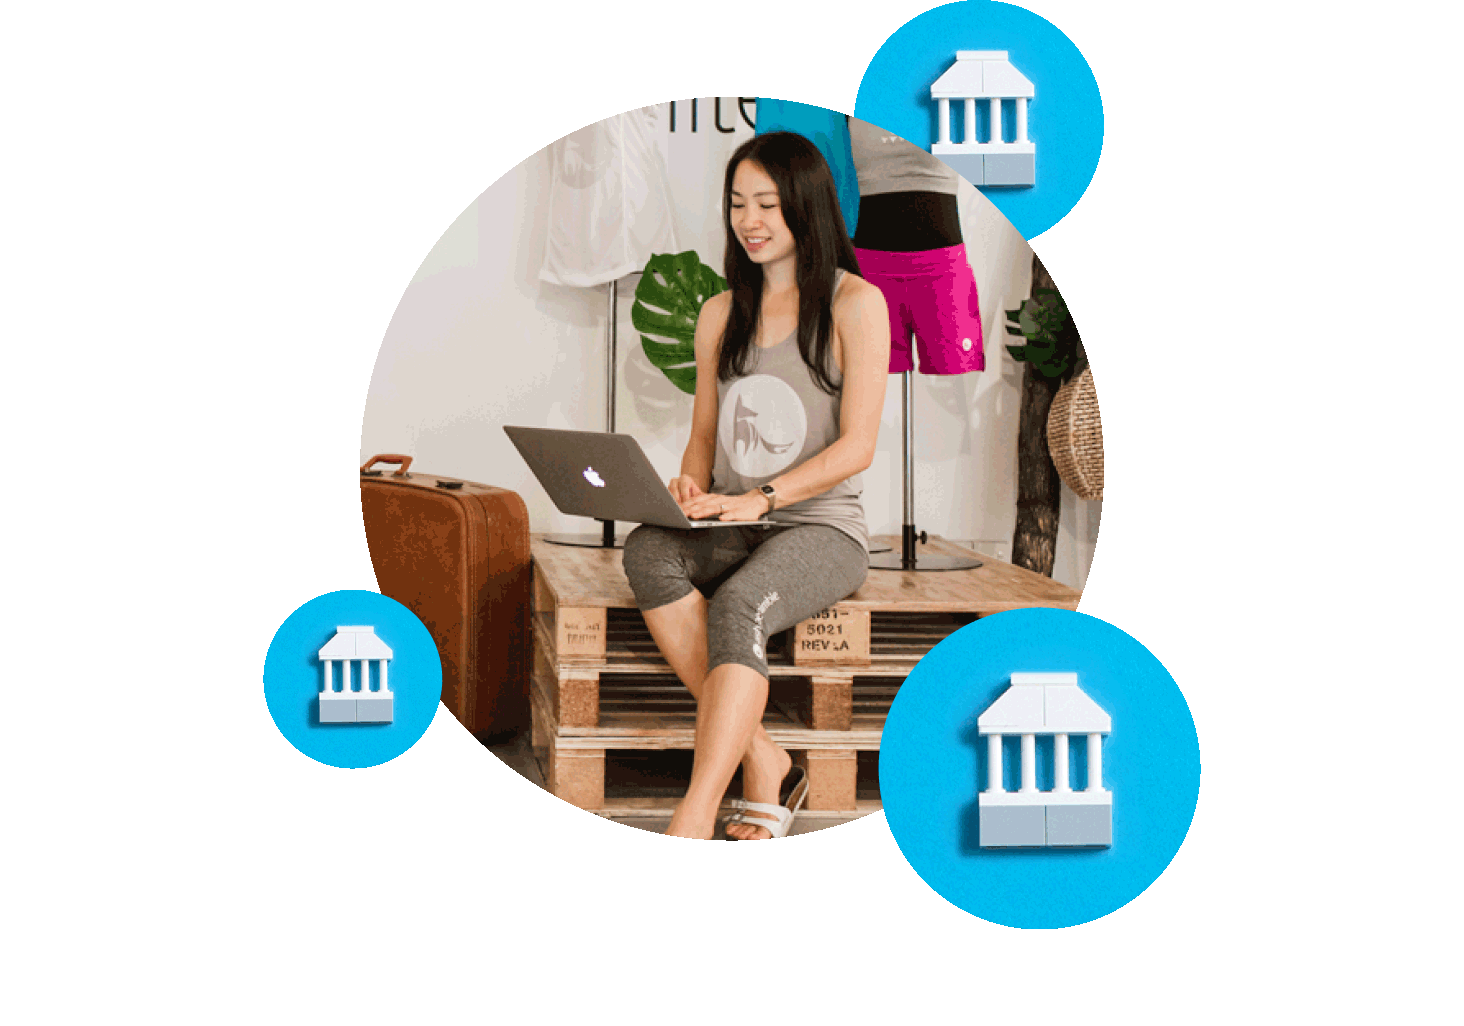 Xero integrates automatically with your bank so reconciliation is easy